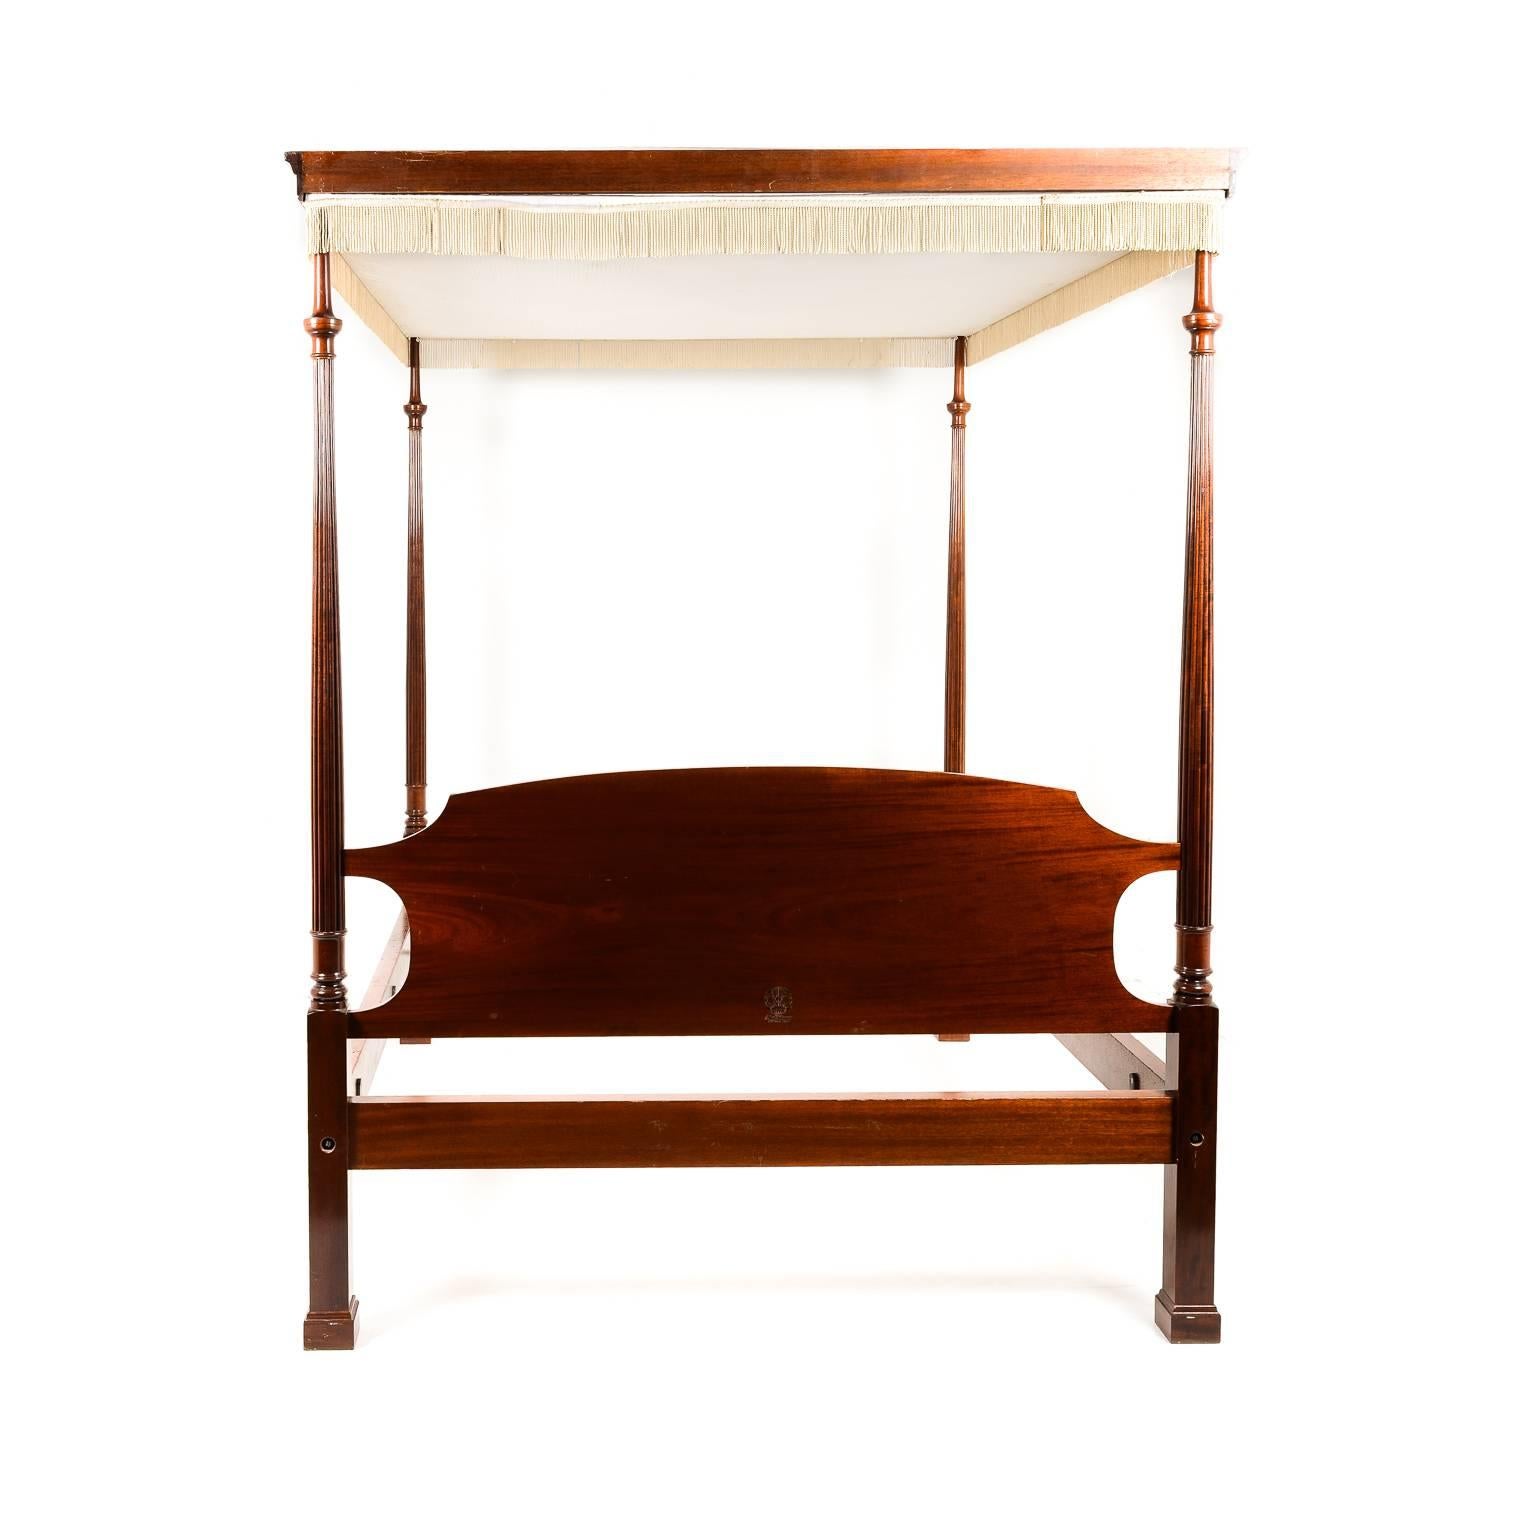 The symbol of handmade quality, this wonderful solid mahogany handmade canopy bed was purchased in France but originated from the U.S.

Reid Classics was started in 1938 and still remain as the leaders of beautiful reproduction beds to this day.